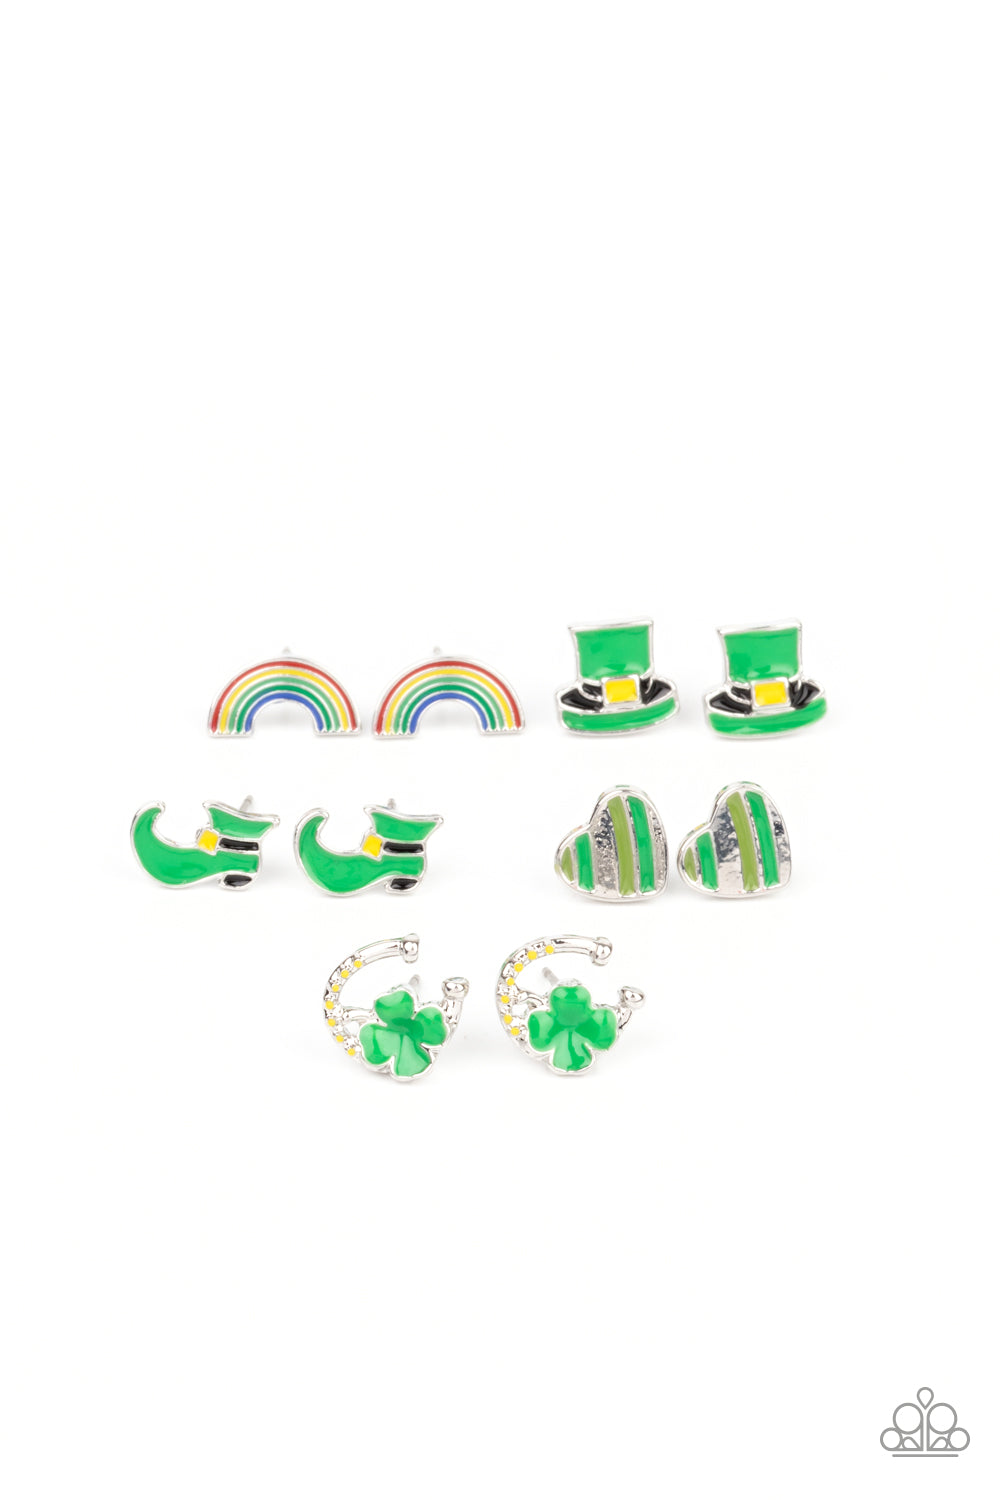 IRISH EYES ARE SMILIN - ASSORTED SET OF 5 PAIRS OF EARRINGS